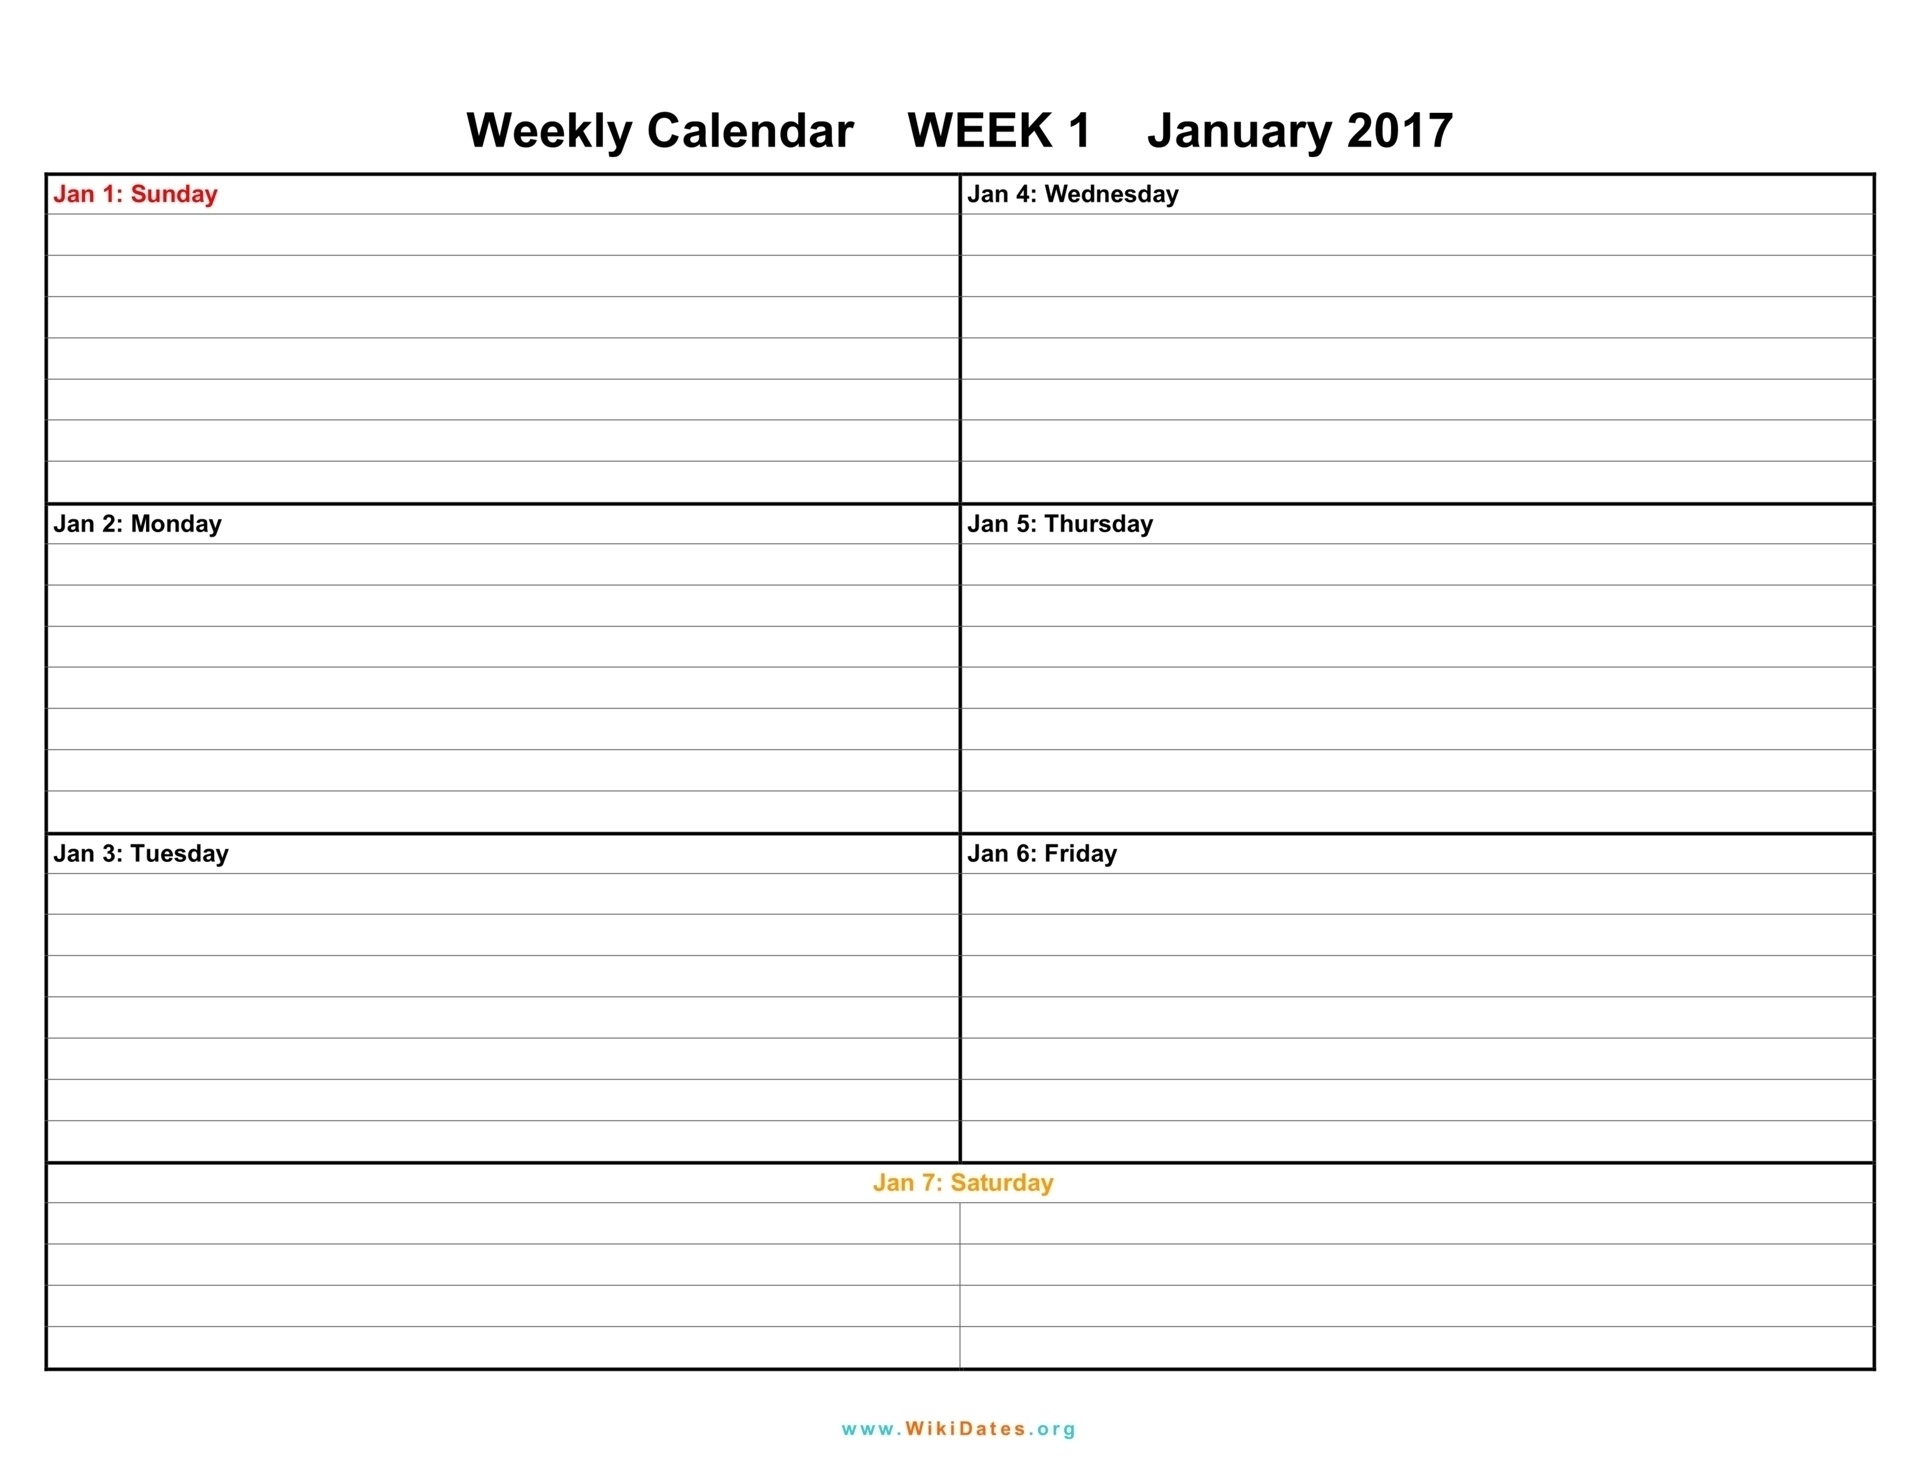 Printable Weekly Calendar With 15 Minute Time Slots | Calendar  Printable Weekly Calendar With 15 Minute Time Slots